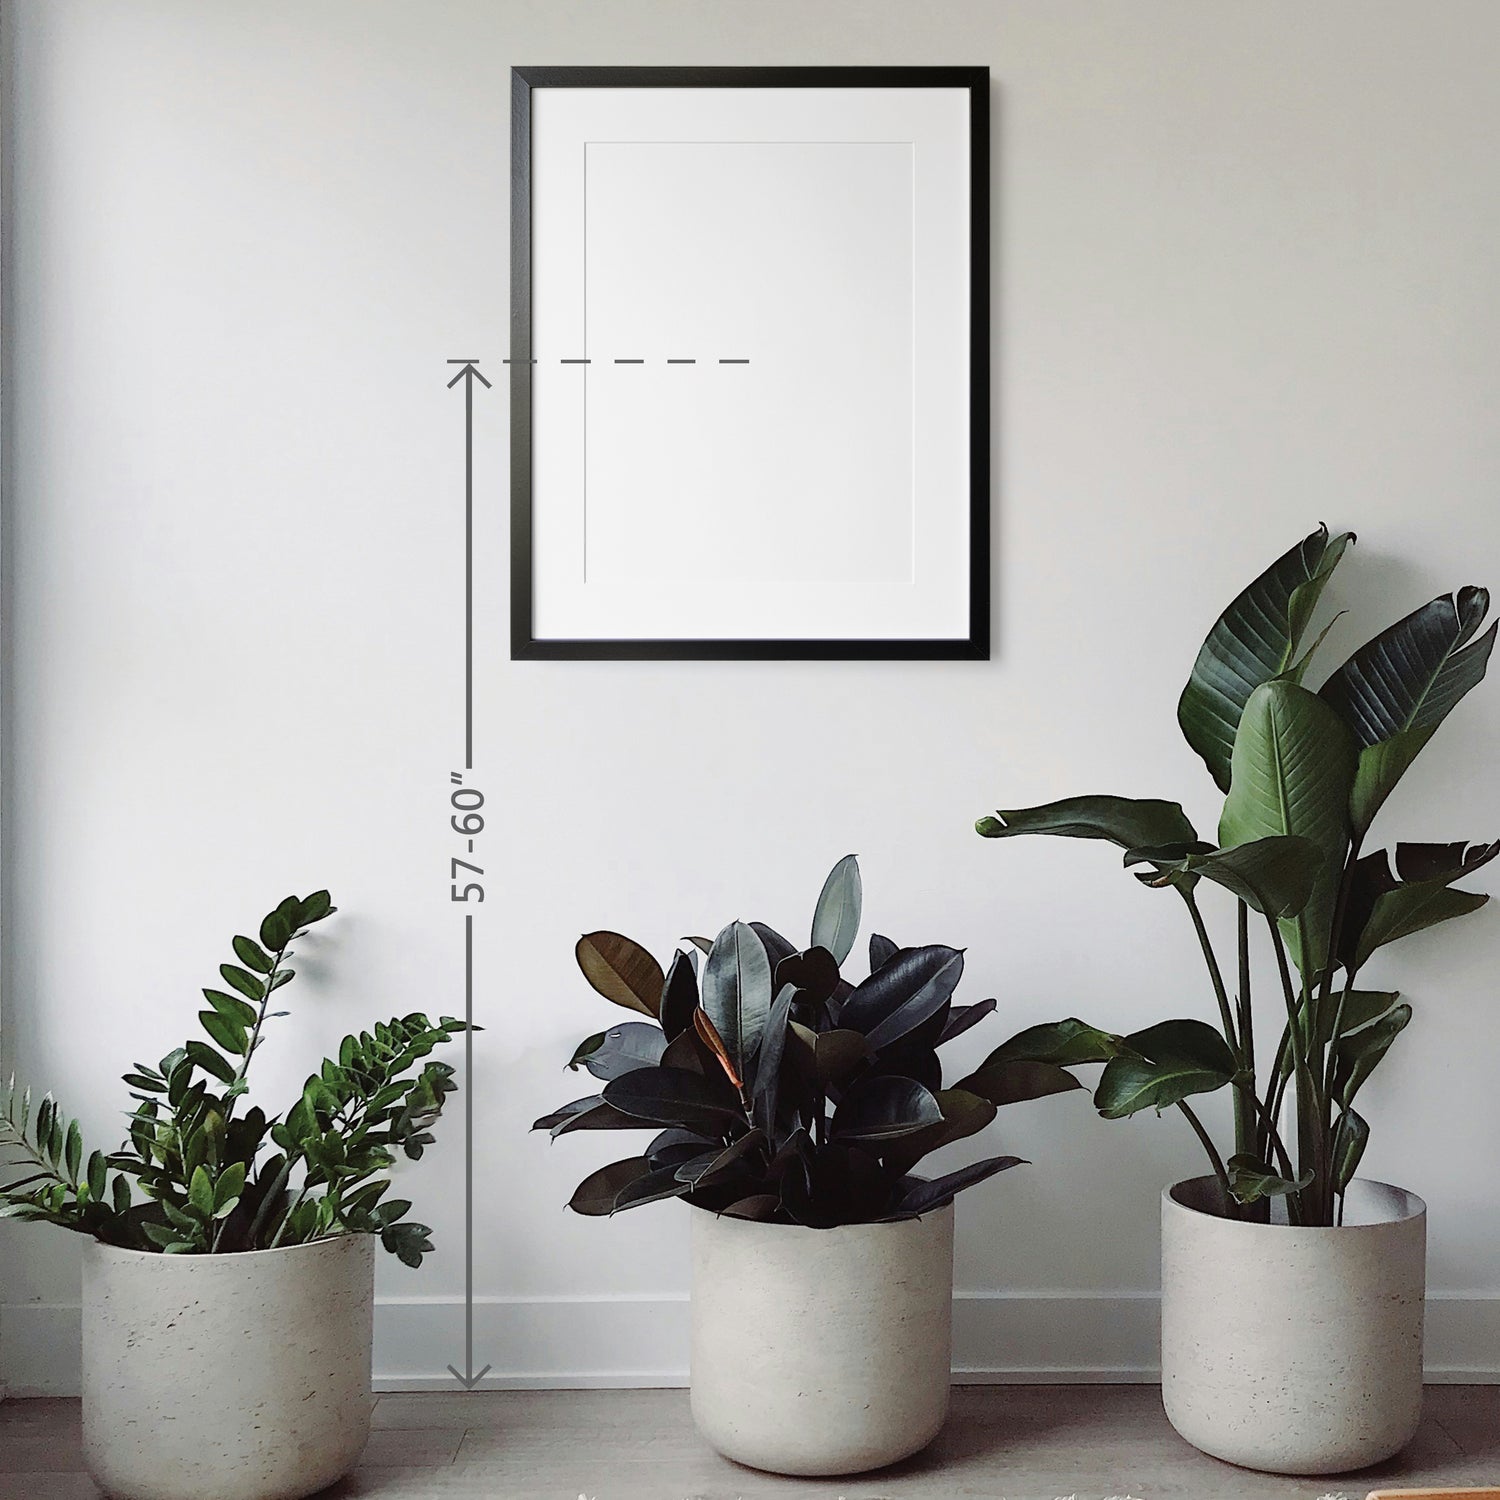 a picture frame hanging on the wall and potted plants on the floor